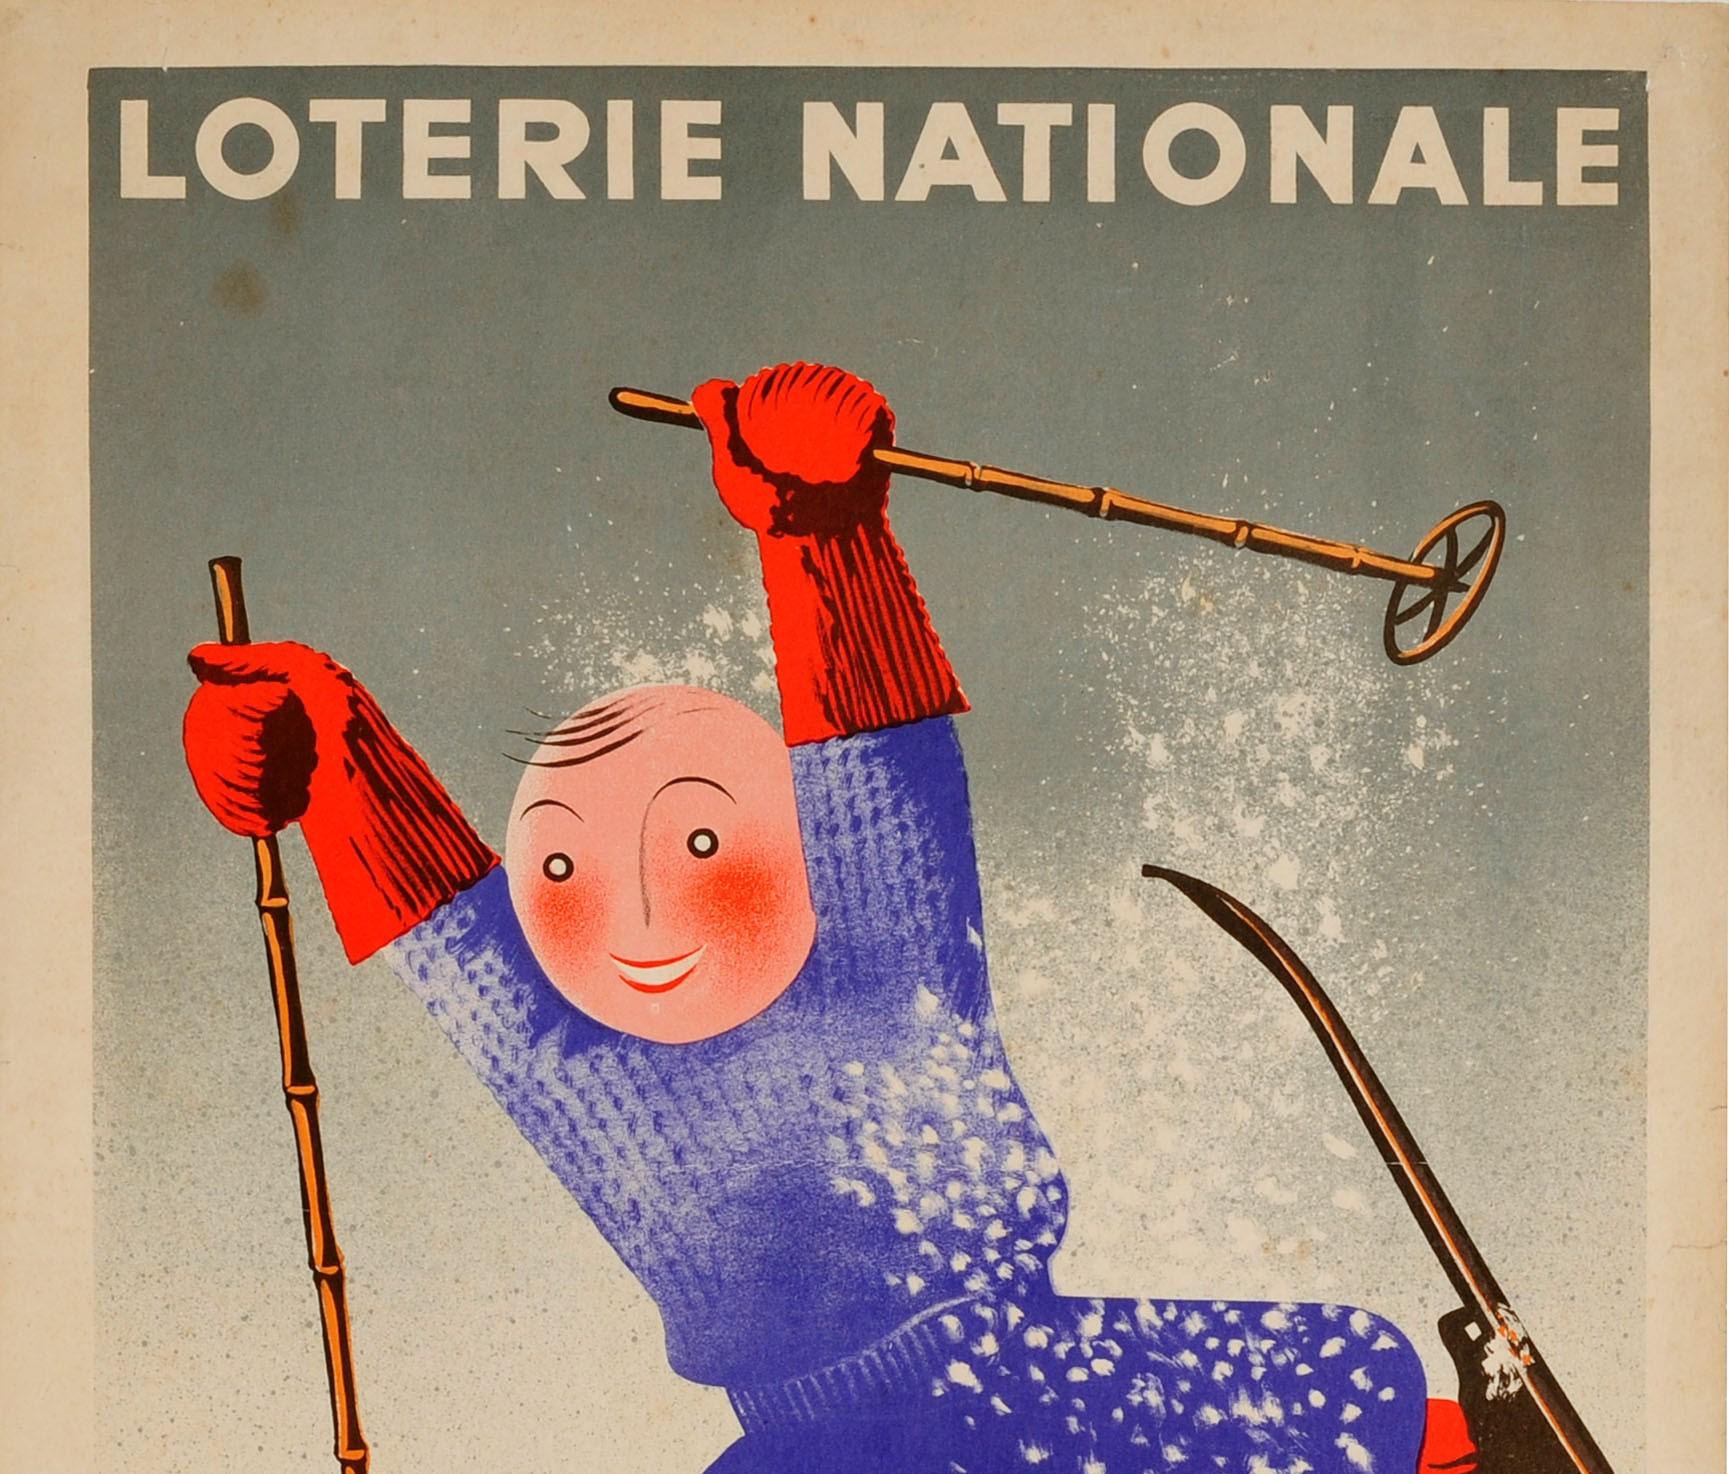 Original vintage advertising poster for the French National Lottery winter sports tranche - Loterie Nationale Sports d'Hiver tranche special des Sports d'Hiver - featuring a fun design by Edgar Derouet (1910-2001) and Charles Lesacq (1909-1940)